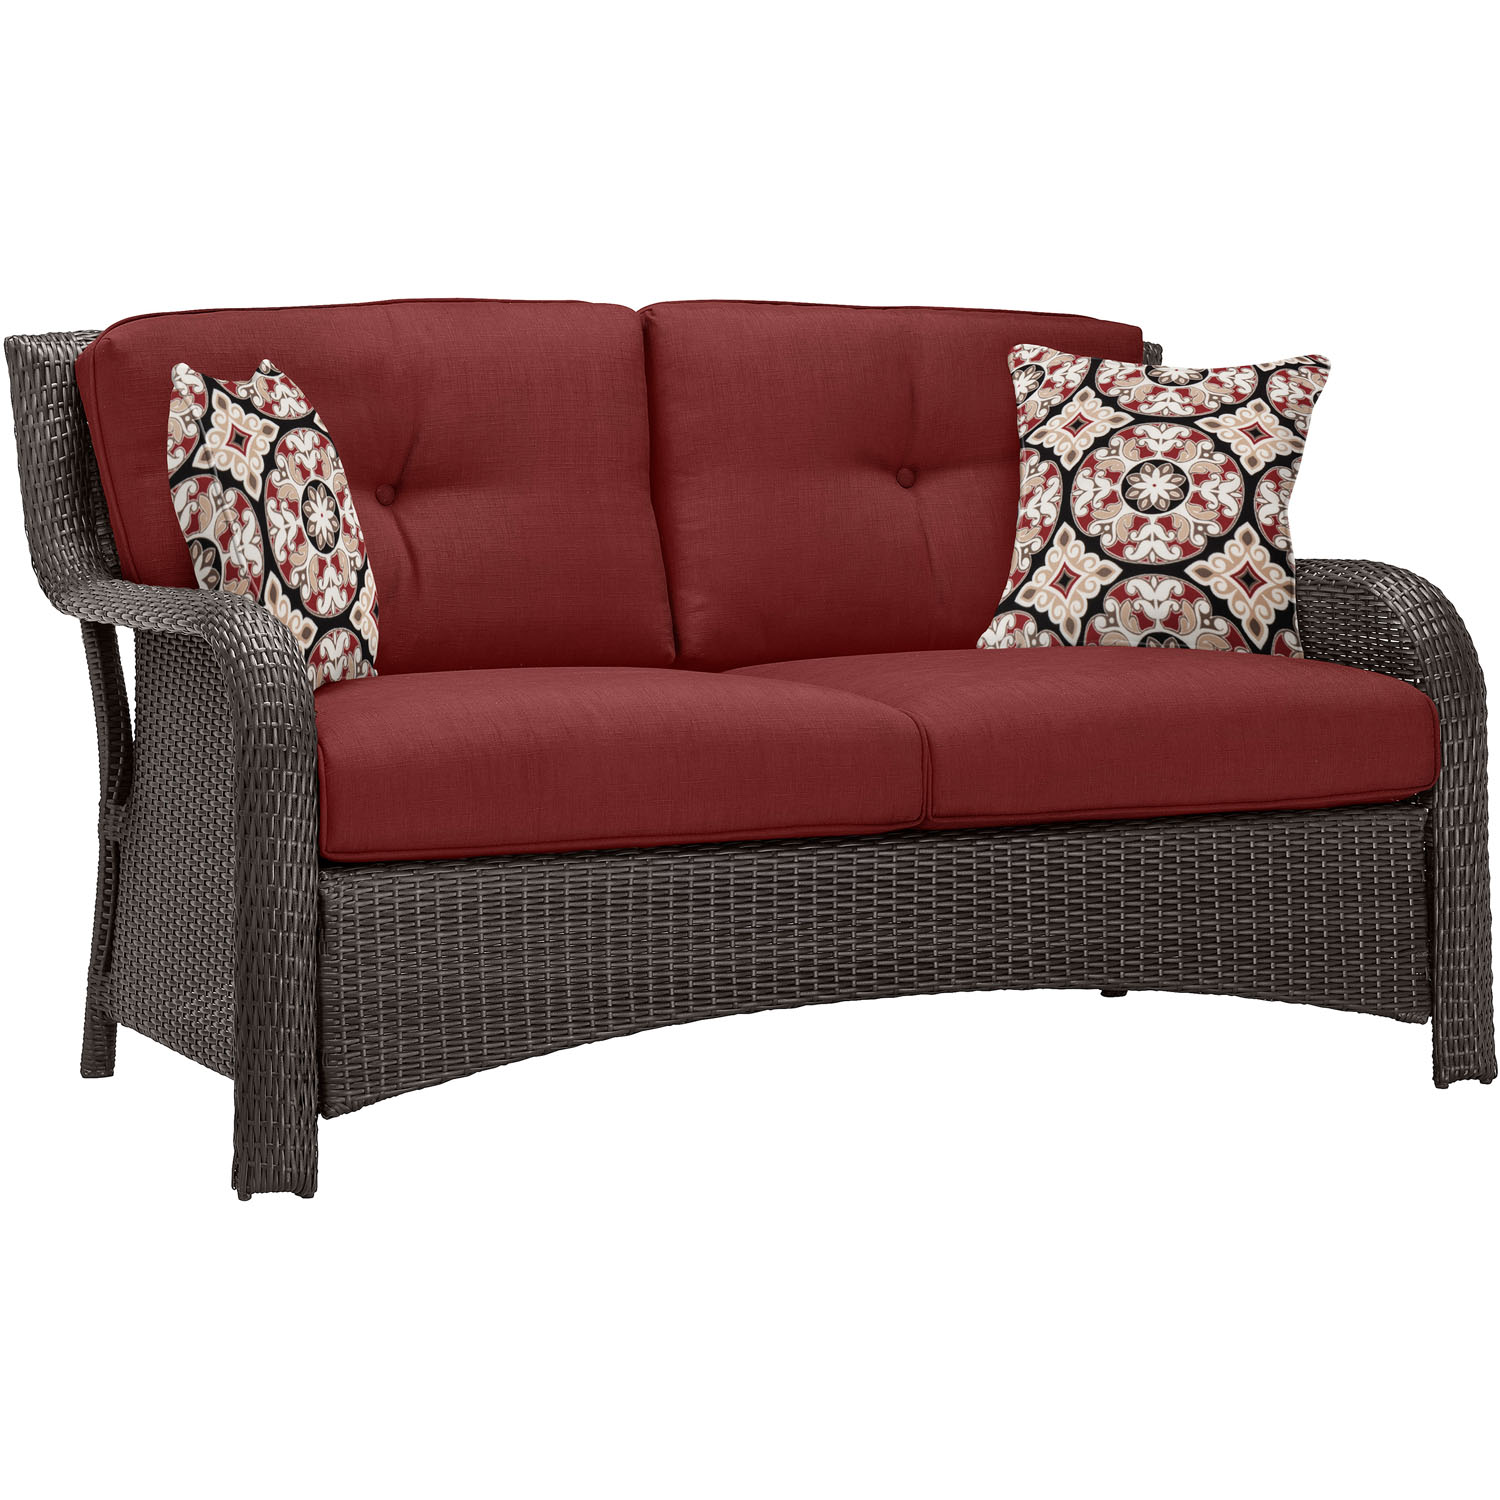 Hanover Strathmere 4-Piece Wicker and Steel Outdoor Conversation Set, Crimson Red - image 5 of 12